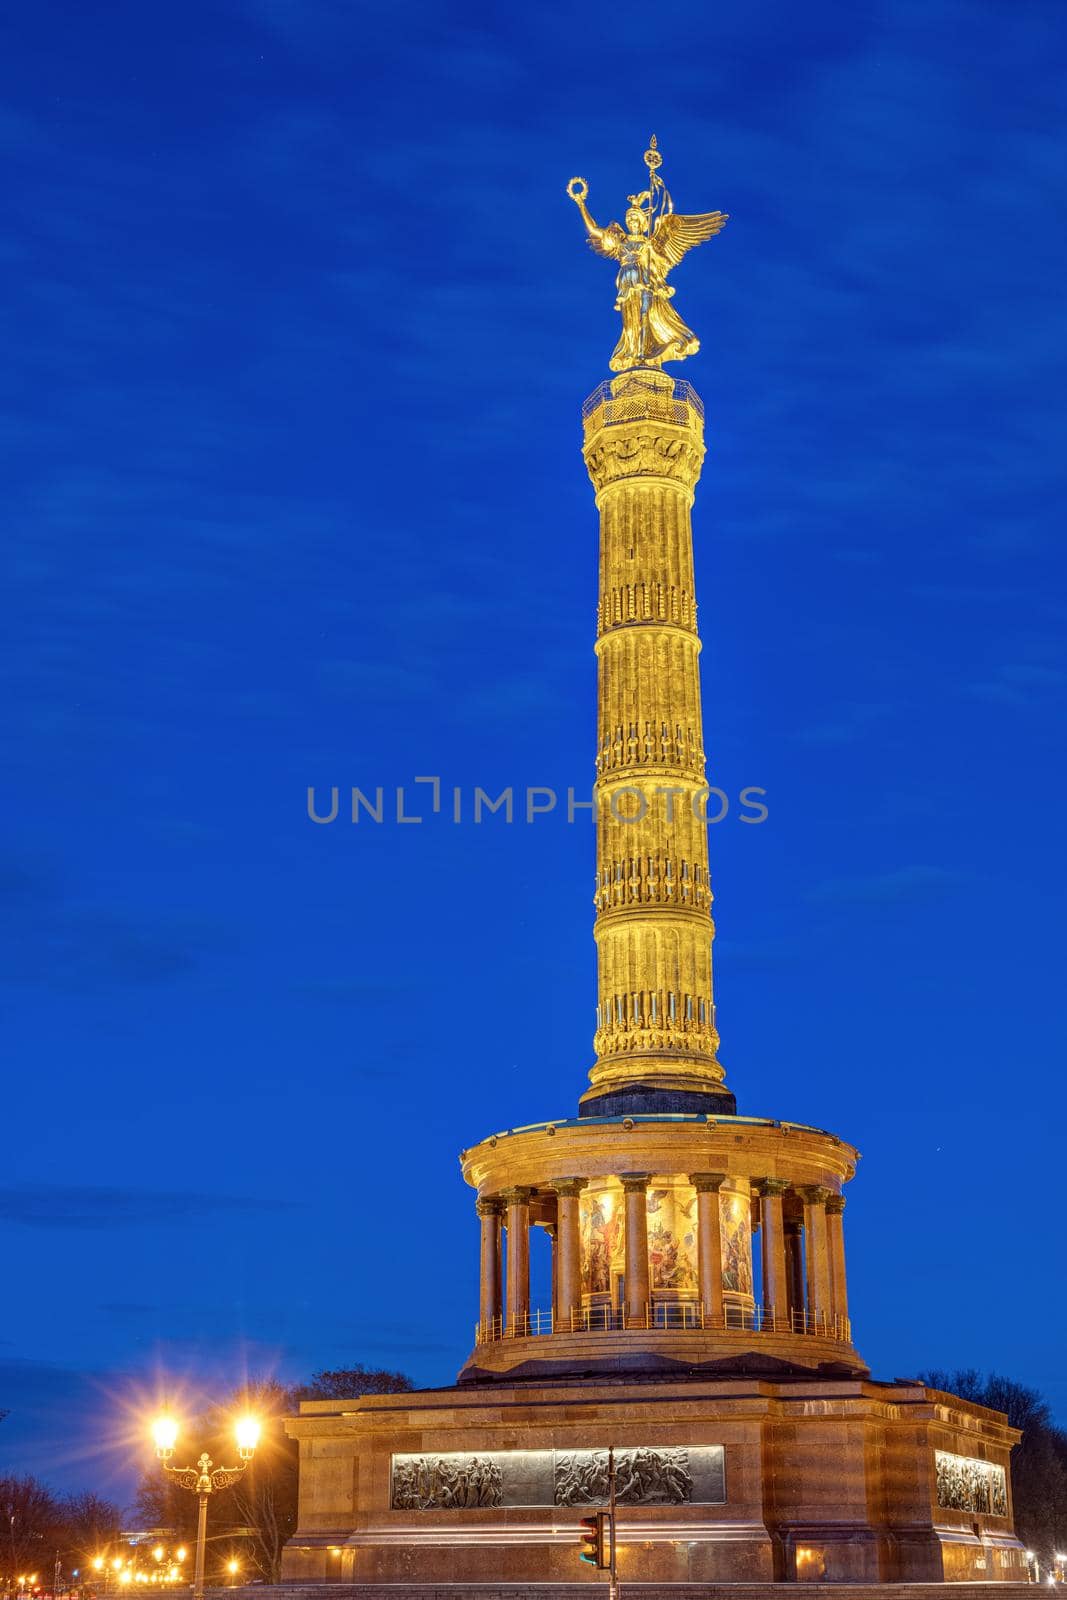 The famous Victory Column in the Tiergarten in Berlin, Germany, at night